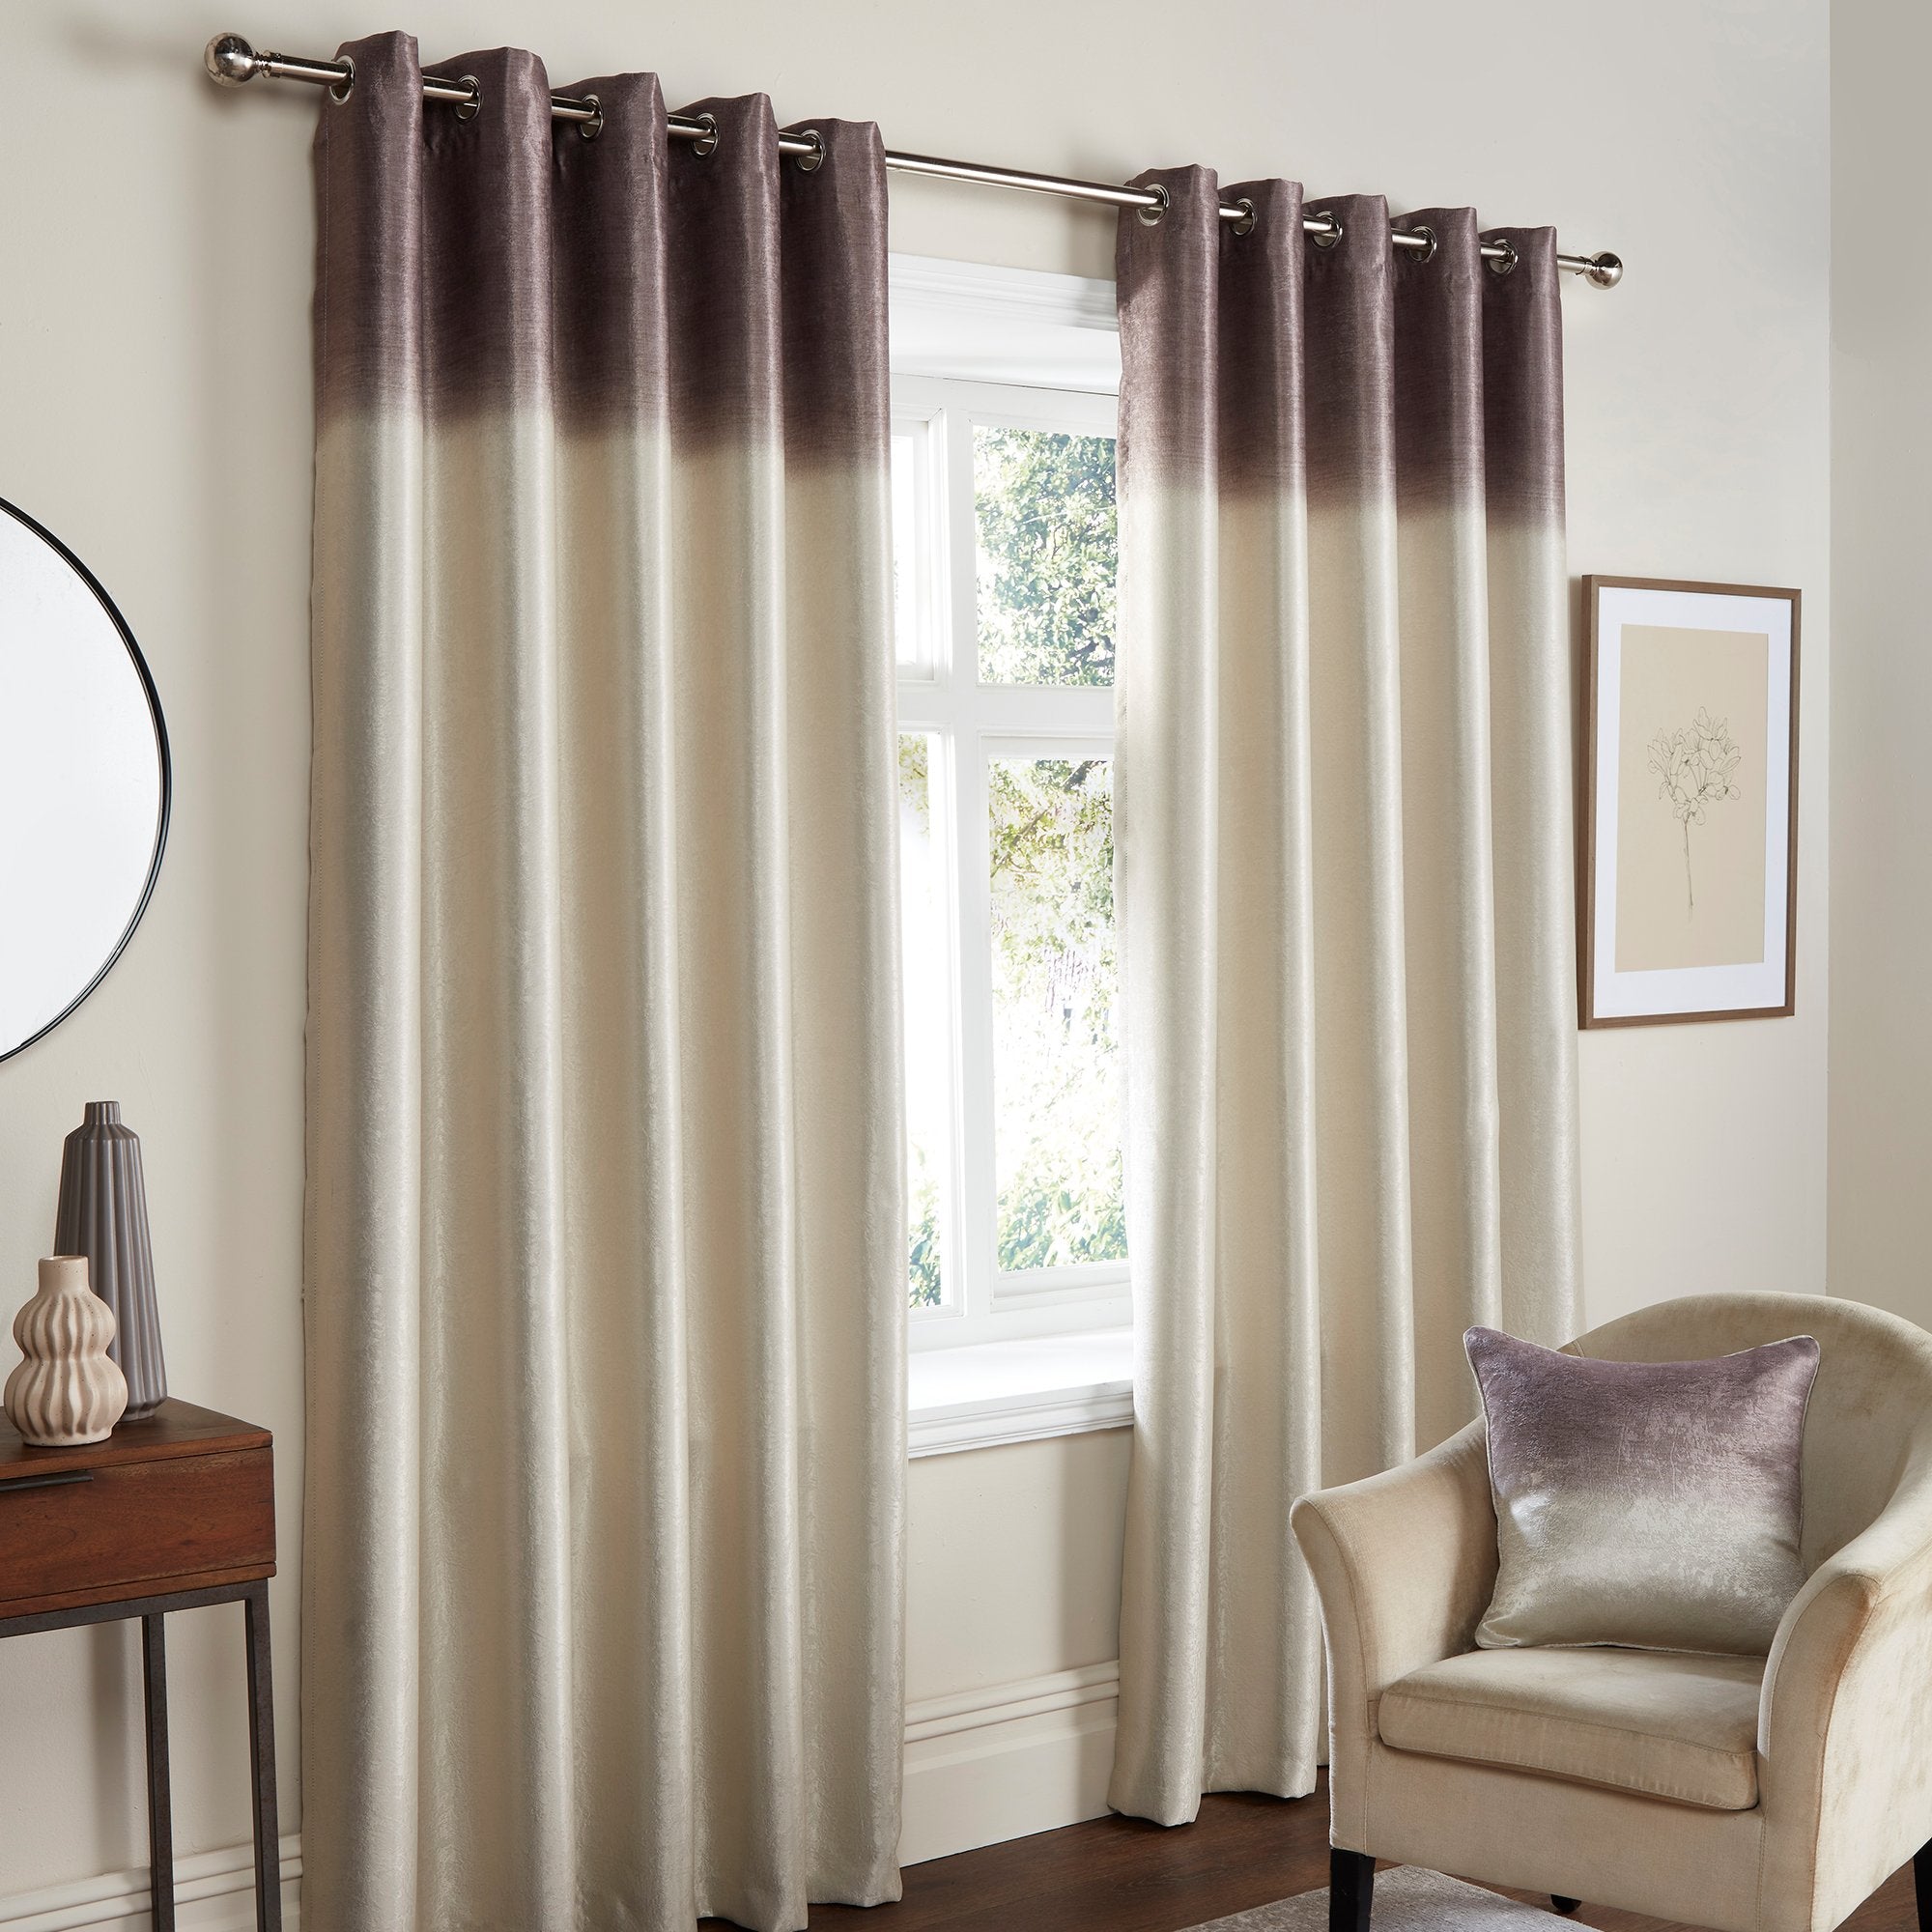 Pair of Eyelet Curtains Ombre Strata by Fusion in Chocolate